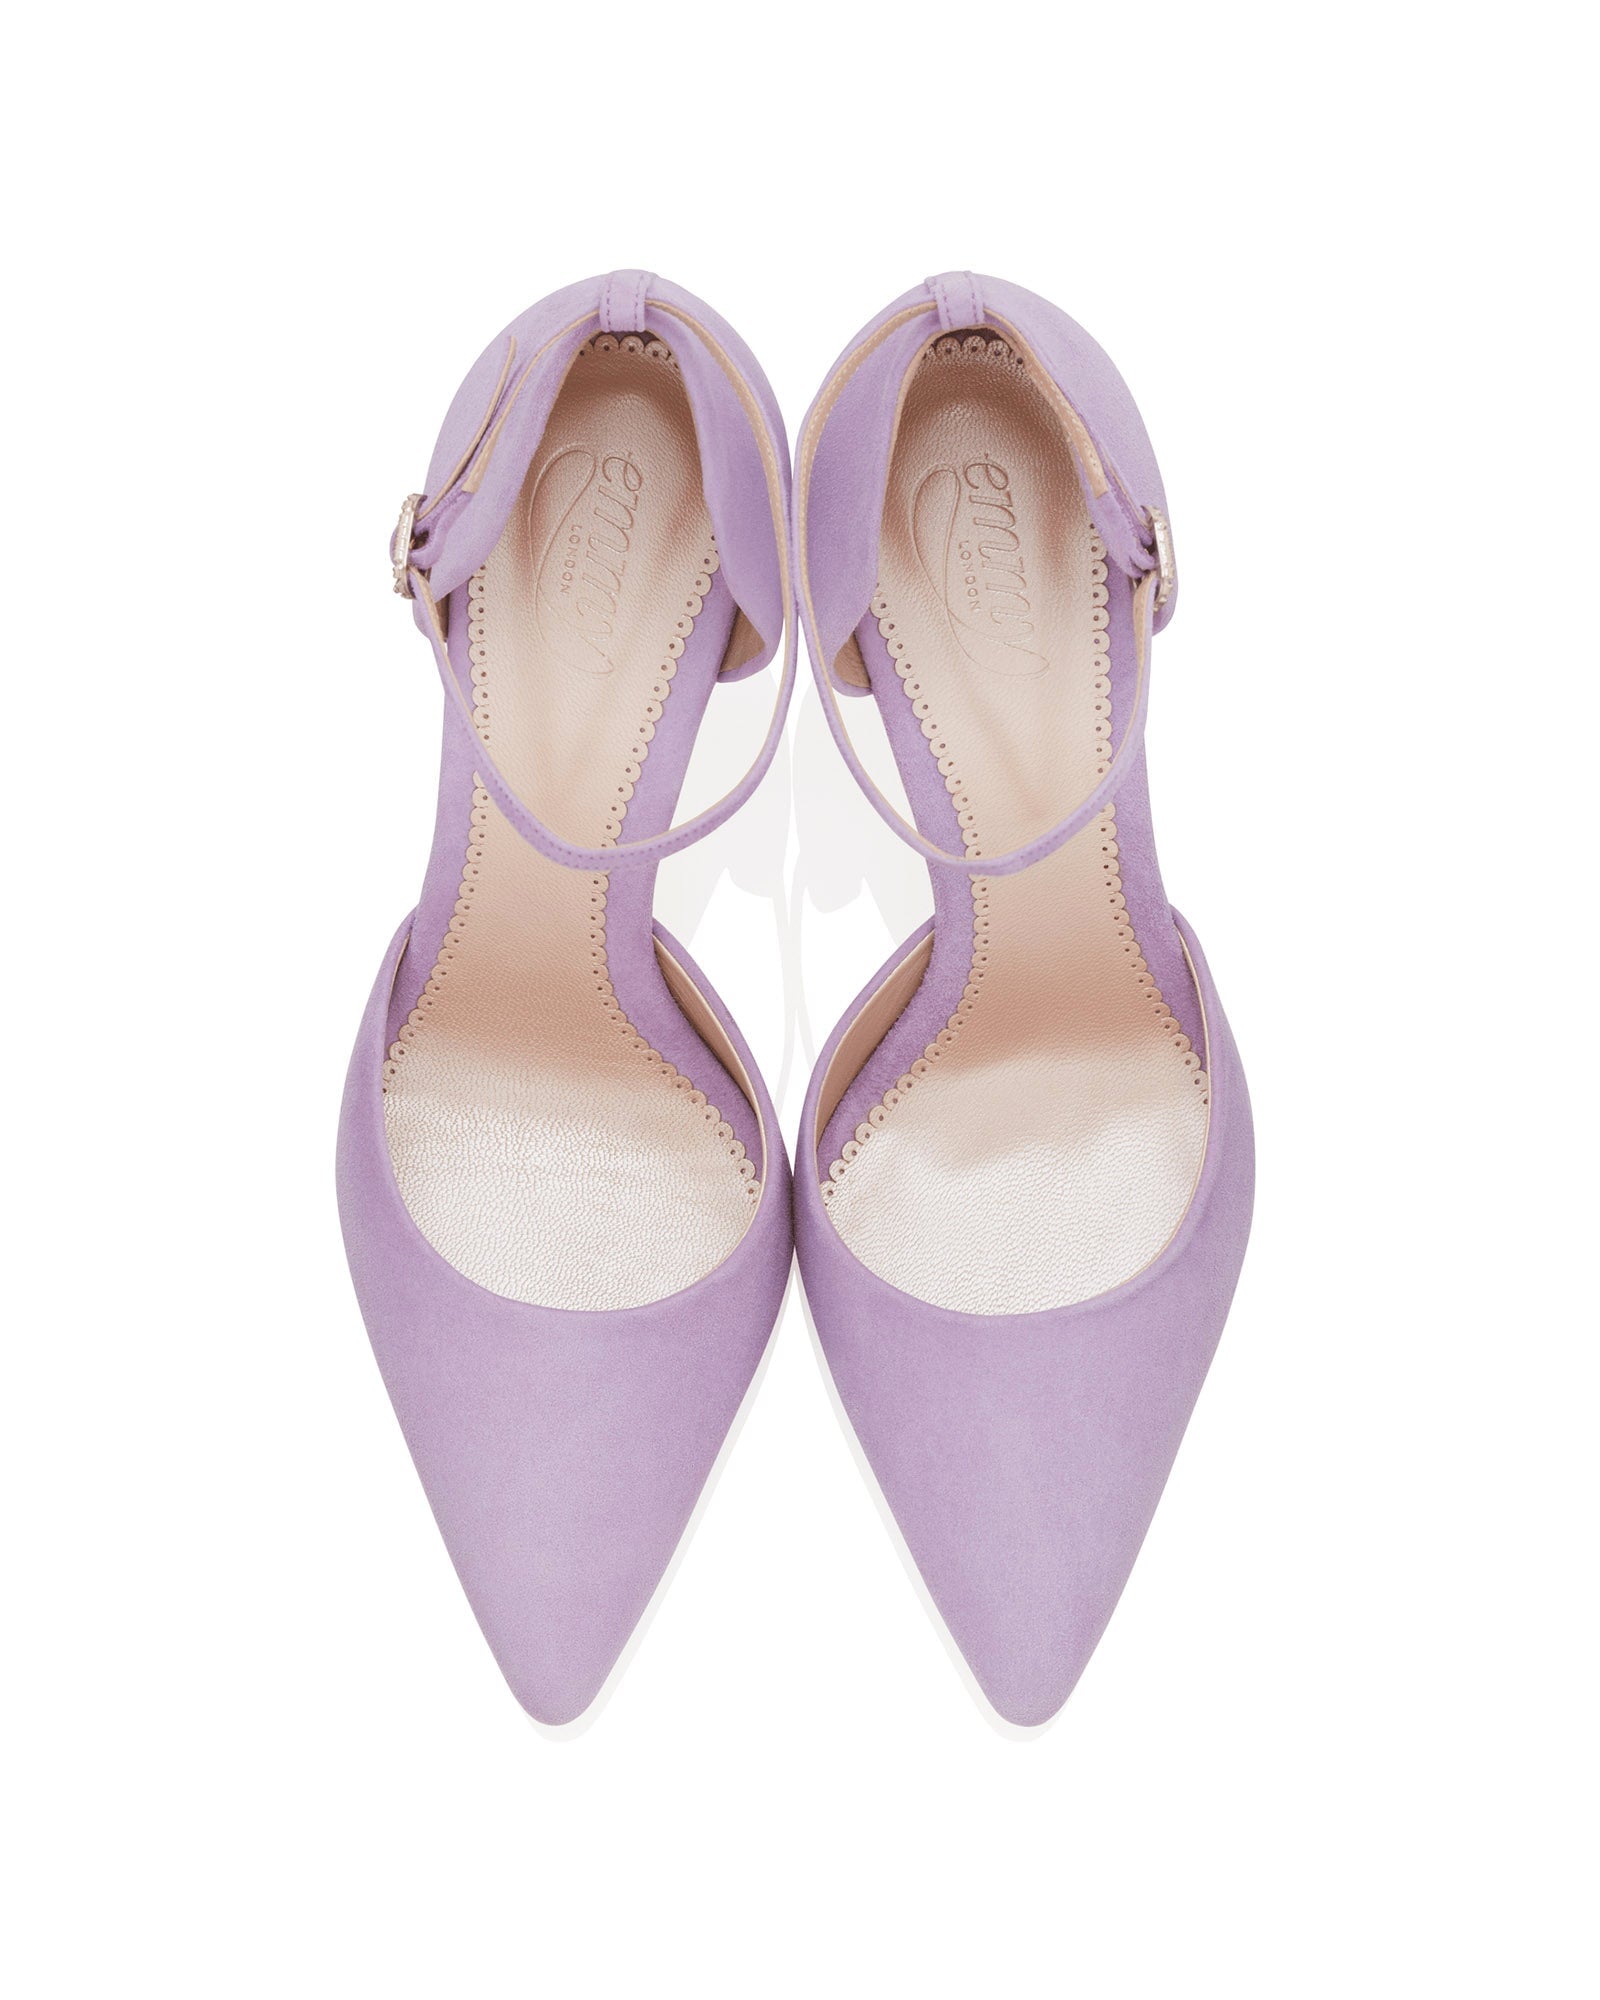 Harriet Lilac Bridal Shoe Pink Heels with Ankle Tie Sash  image